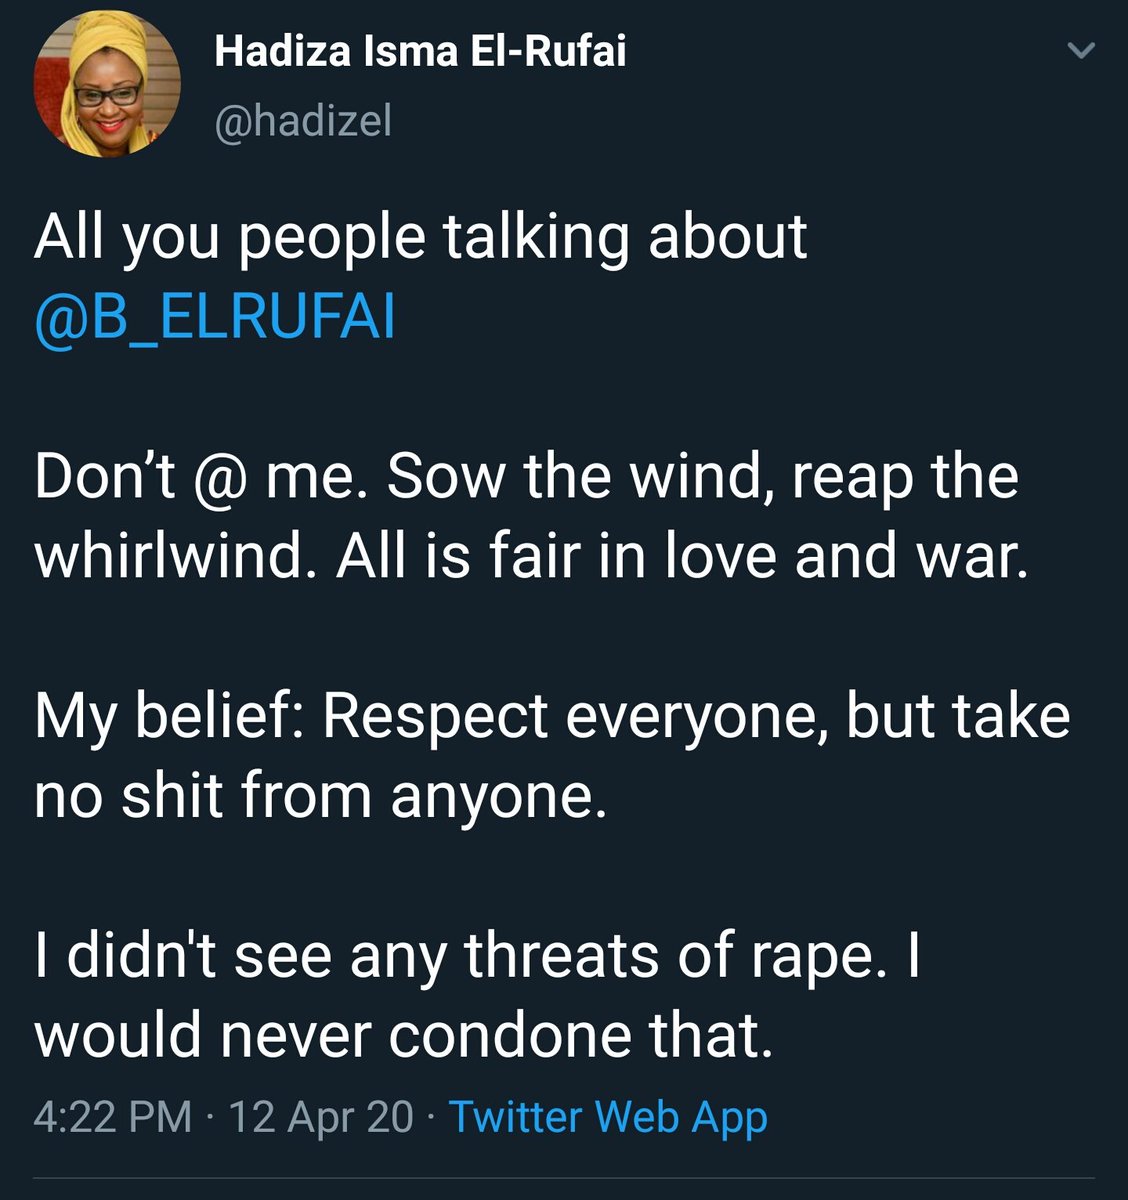 To her rape culture enabling comments after her son  @B_ELRUFAI threatened a woman with gang rape.  @hadizel herself, a woman and the First Lady of Kaduna state went ahead to encourage such a behavior and it wasn't only after it became a National shame that she apologized.